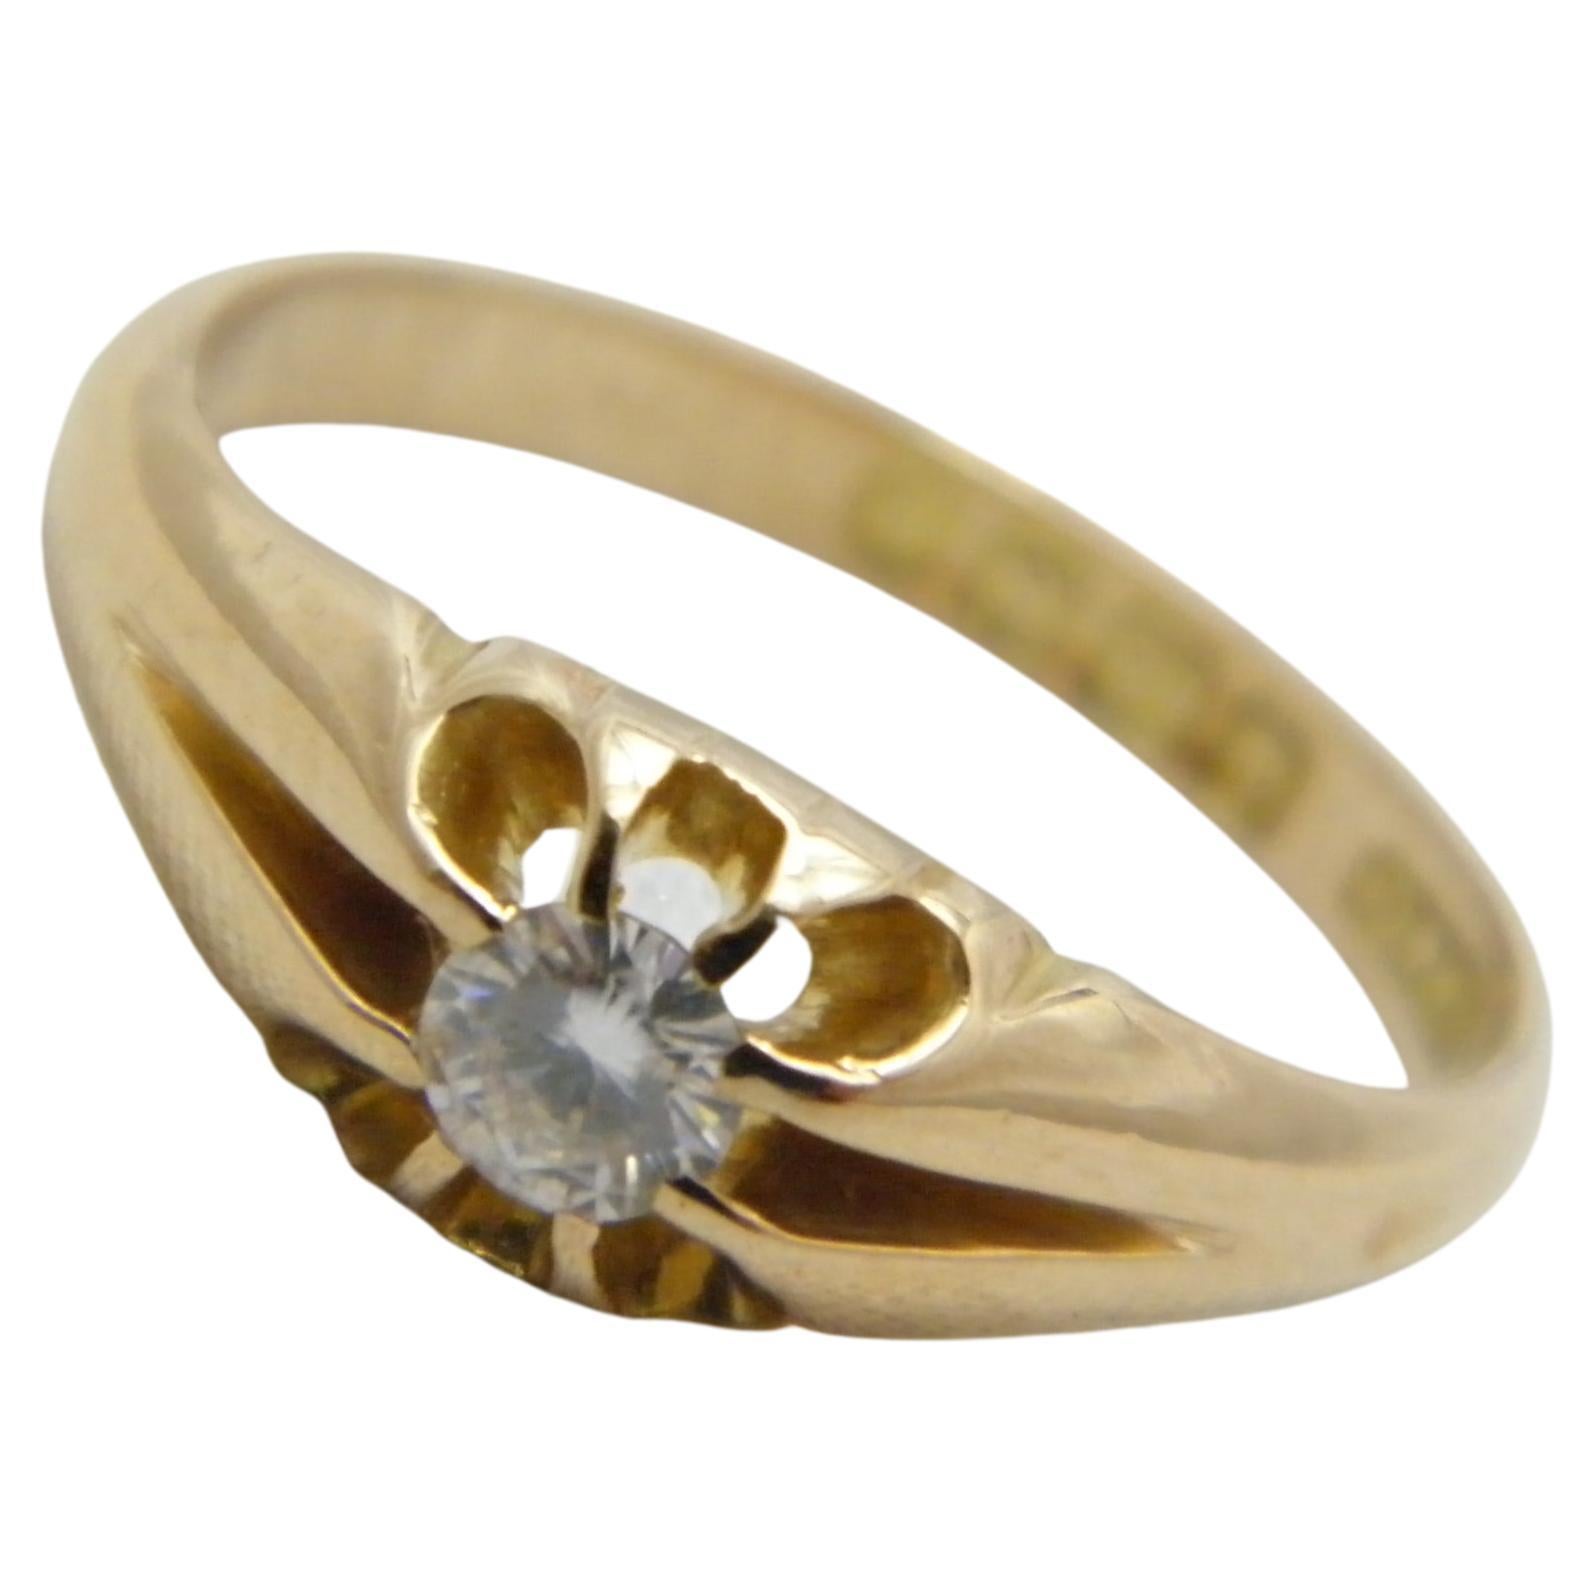 Antique 18ct Gold 0.33Cttw Diamond Solitaire Gypsy Ring Size N 6.75 750 Purity For Sale